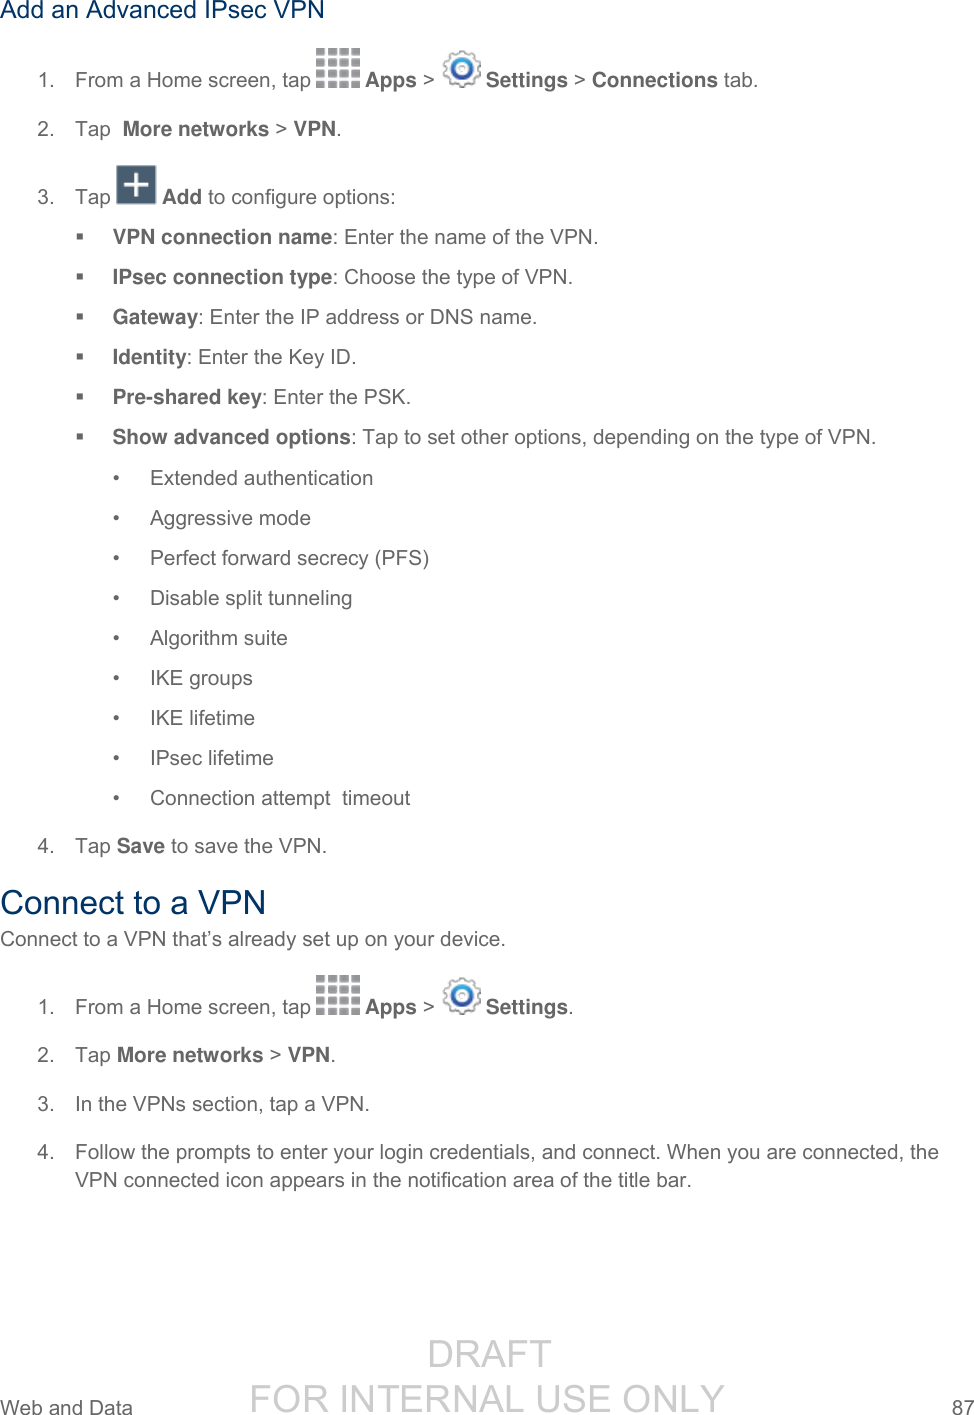                  DRAFT FOR INTERNAL USE ONLY Web and Data  87   Add an Advanced IPsec VPN 1.  From a Home screen, tap   Apps &gt;   Settings &gt; Connections tab. 2.  Tap  More networks &gt; VPN. 3.  Tap   Add to configure options:  VPN connection name: Enter the name of the VPN.  IPsec connection type: Choose the type of VPN.  Gateway: Enter the IP address or DNS name.  Identity: Enter the Key ID.  Pre-shared key: Enter the PSK.  Show advanced options: Tap to set other options, depending on the type of VPN. •  Extended authentication •  Aggressive mode •  Perfect forward secrecy (PFS) •  Disable split tunneling •  Algorithm suite •  IKE groups •  IKE lifetime •  IPsec lifetime •  Connection attempt  timeout 4.  Tap Save to save the VPN. Connect to a VPN Connect to a VPN that’s already set up on your device. 1.  From a Home screen, tap   Apps &gt;   Settings. 2.  Tap More networks &gt; VPN. 3.  In the VPNs section, tap a VPN. 4.  Follow the prompts to enter your login credentials, and connect. When you are connected, the VPN connected icon appears in the notification area of the title bar. 